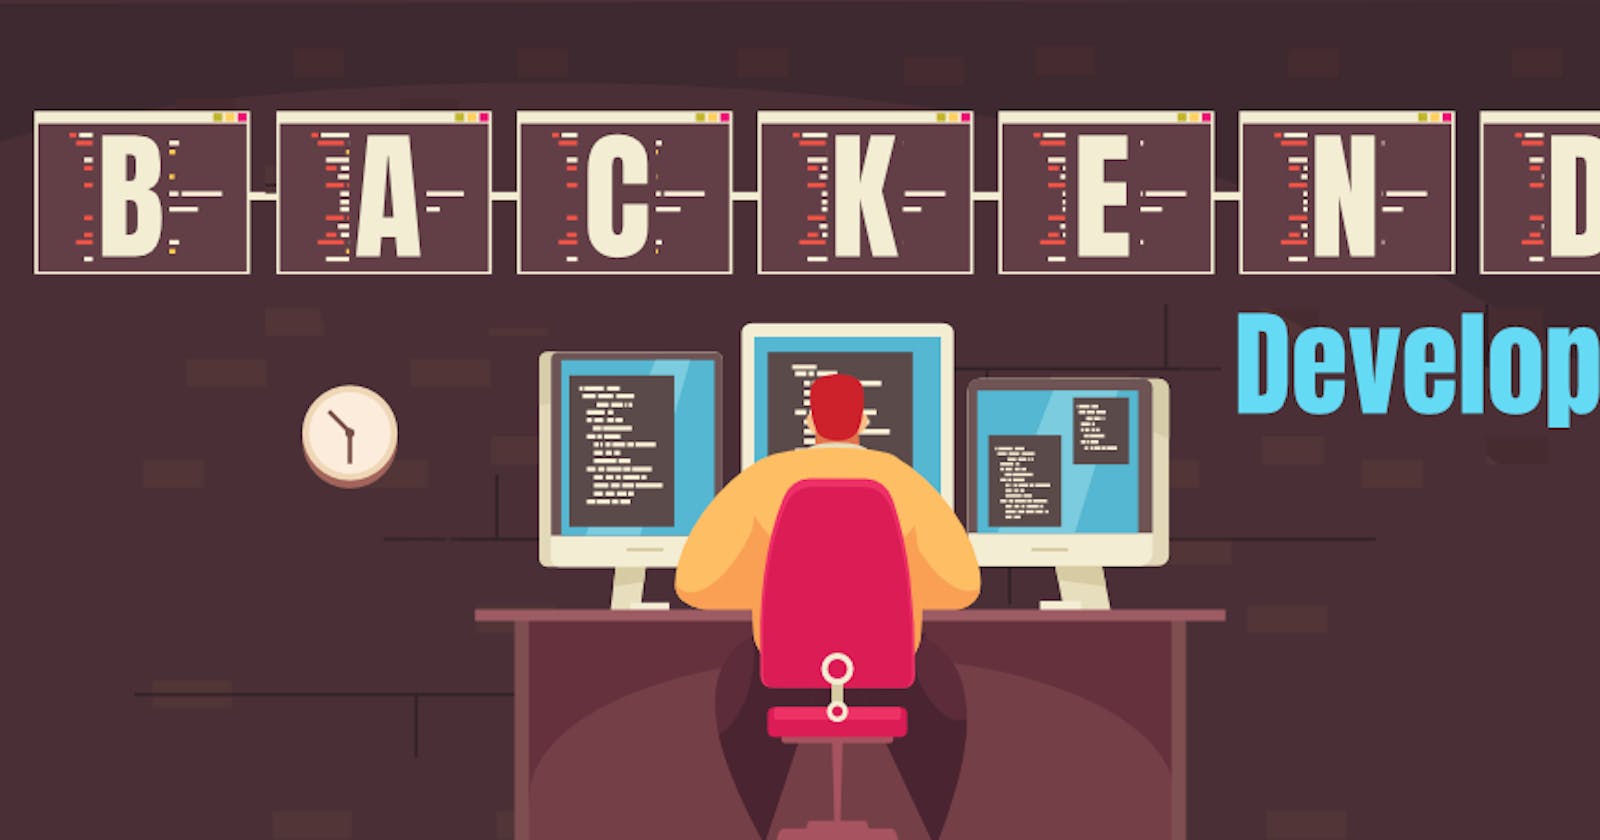 Who is a back-end developer? Explain the role and responsibilities in your own words.